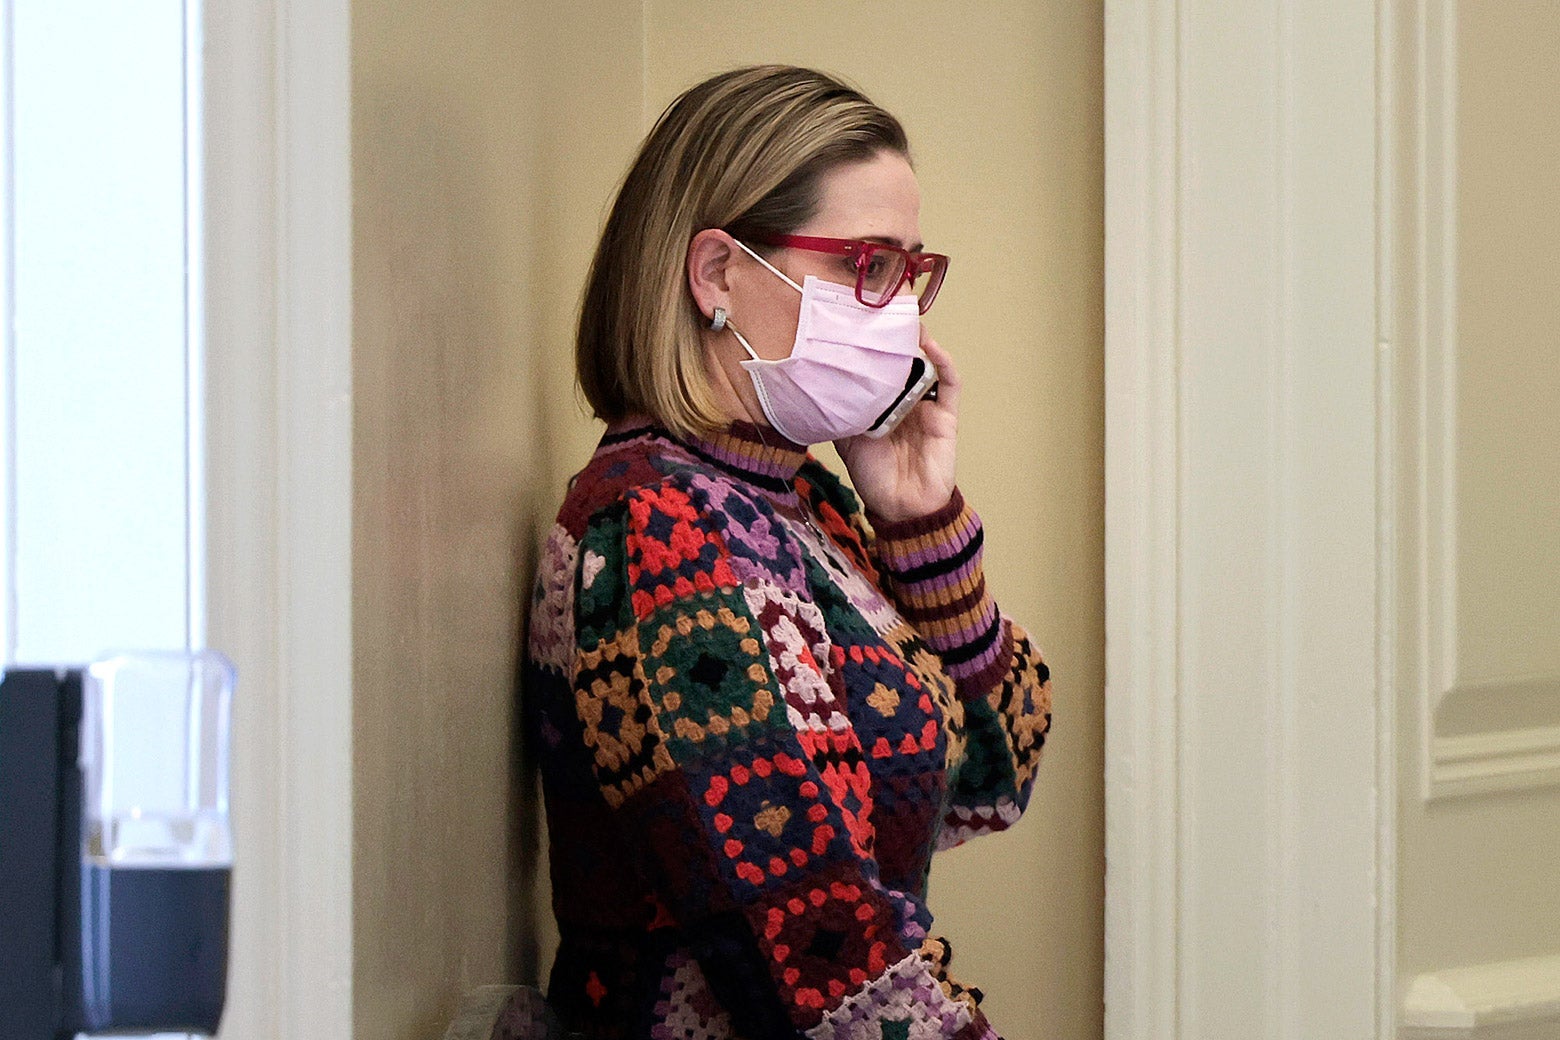 Kyrsten Sinema, in a pink face mask, talks on a cell phone.